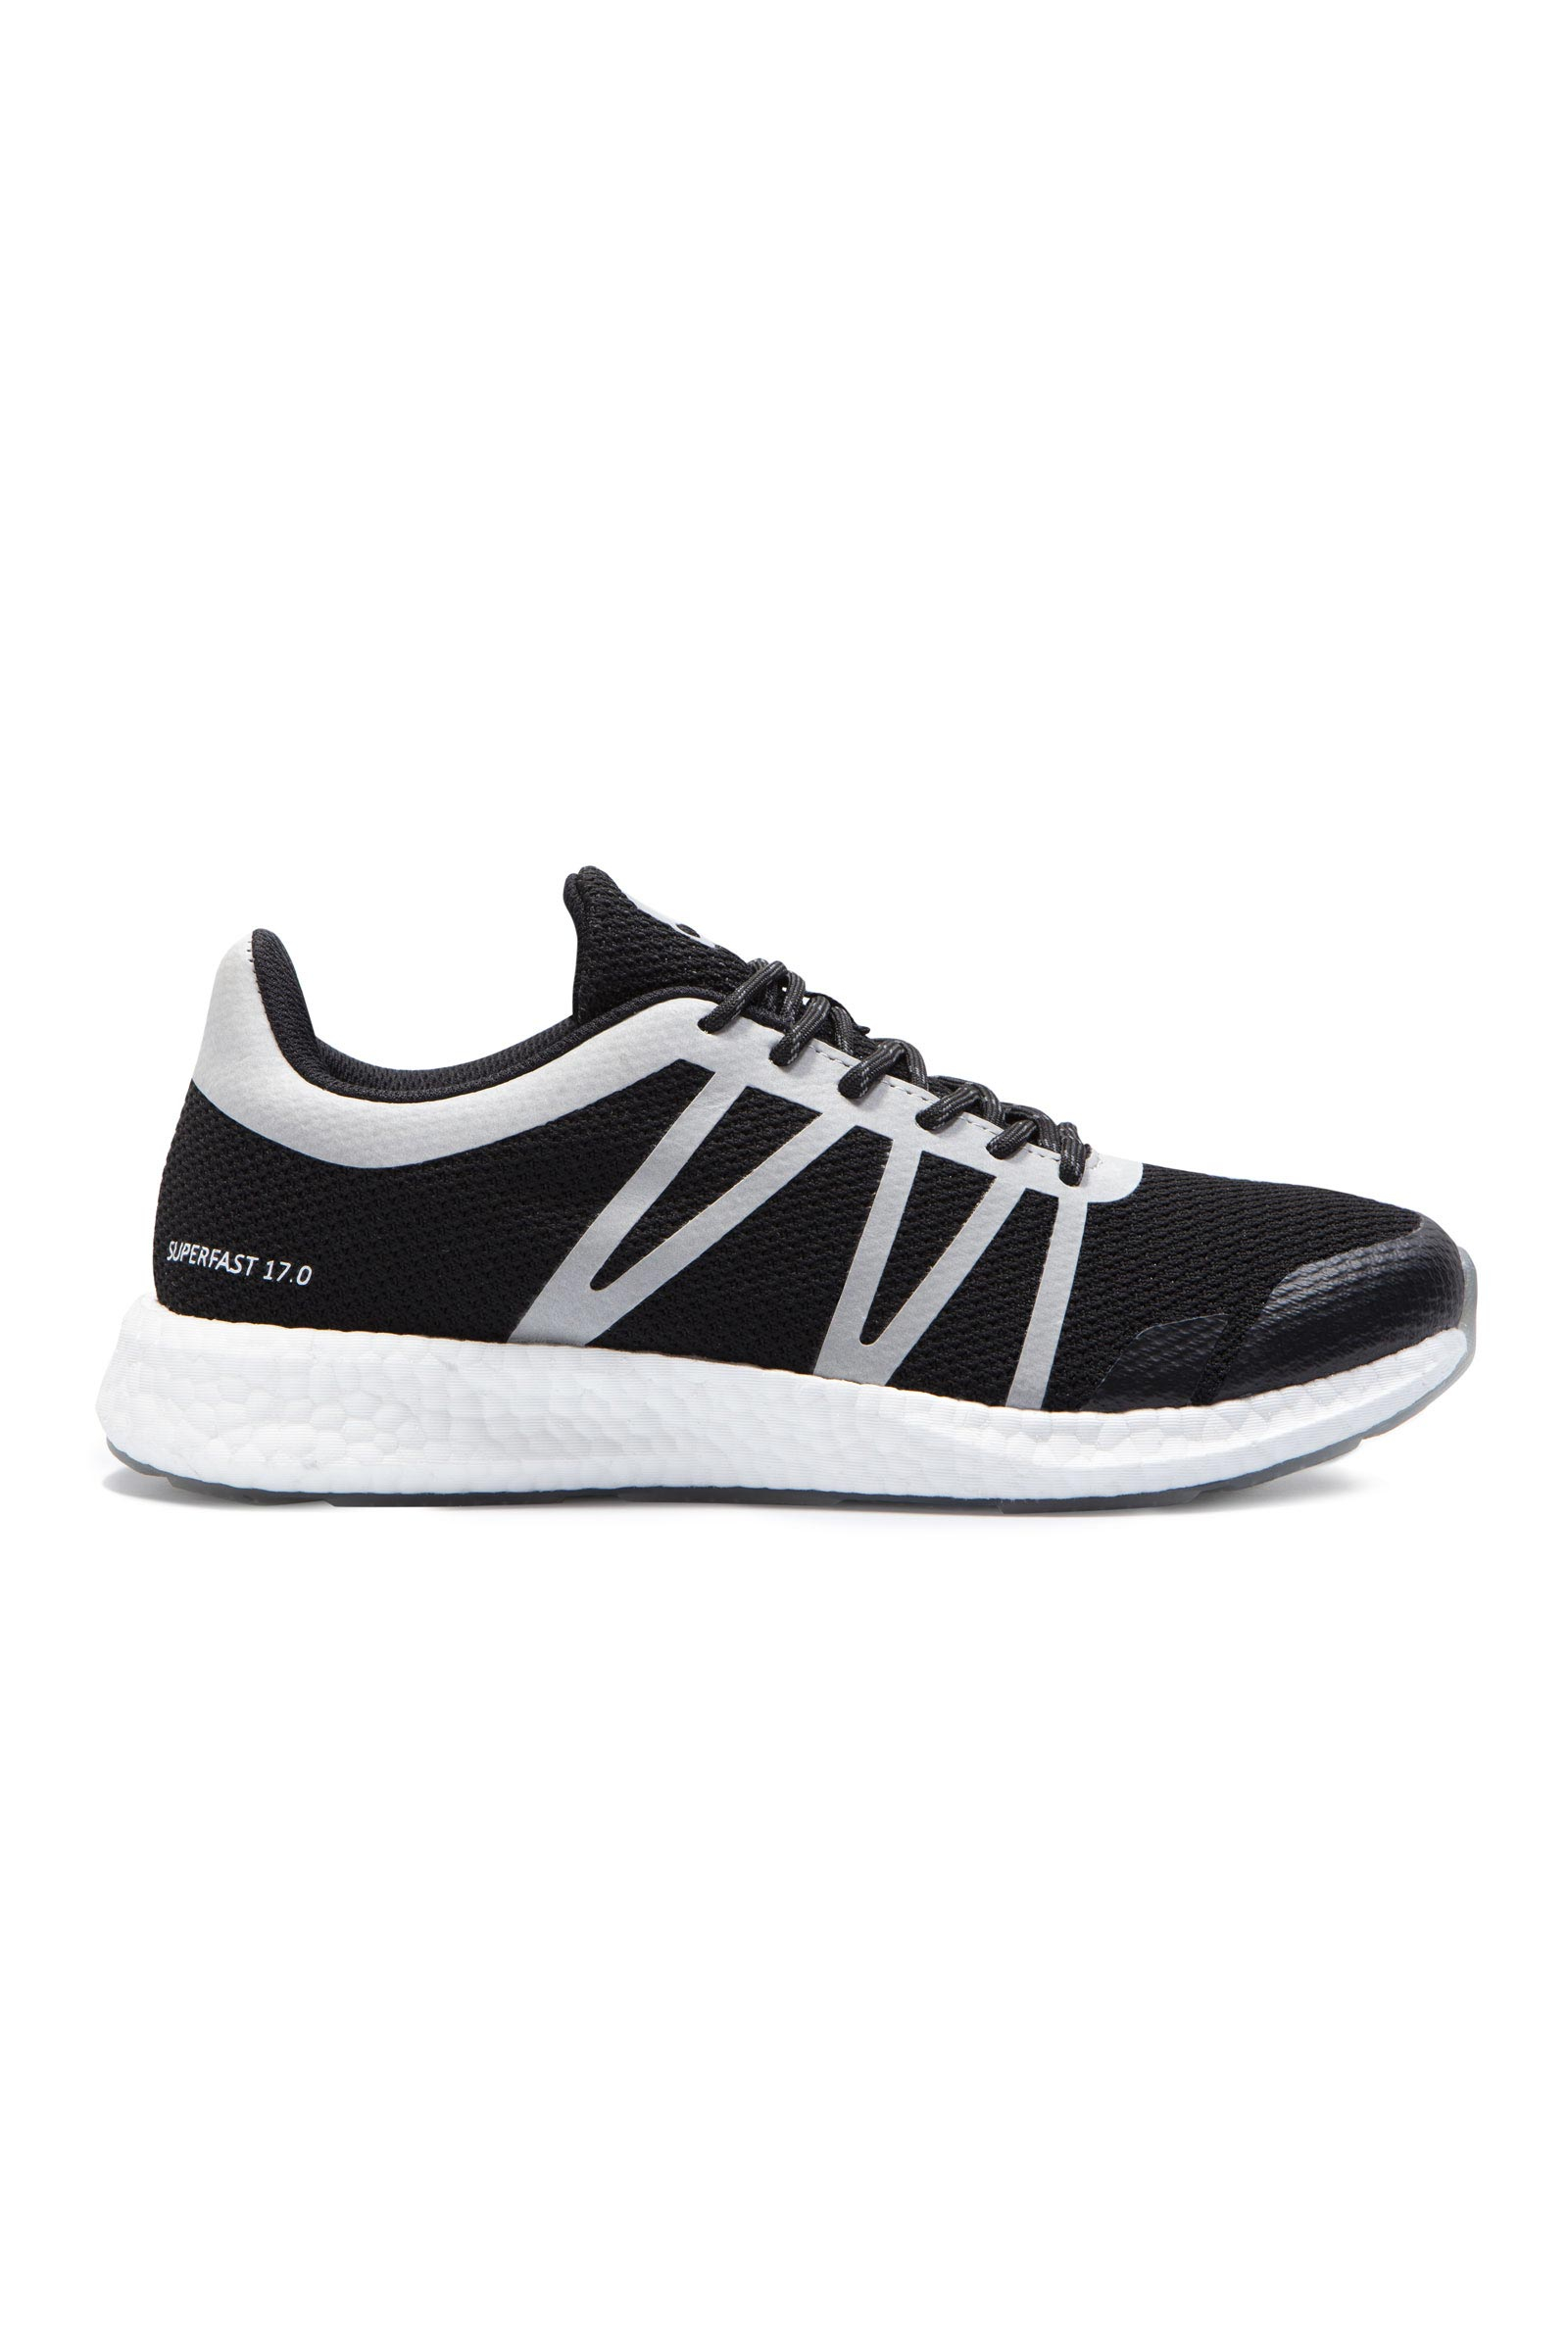 RUNNING SHOES - Outlet Hydrogen - Abbigliamento sportivo